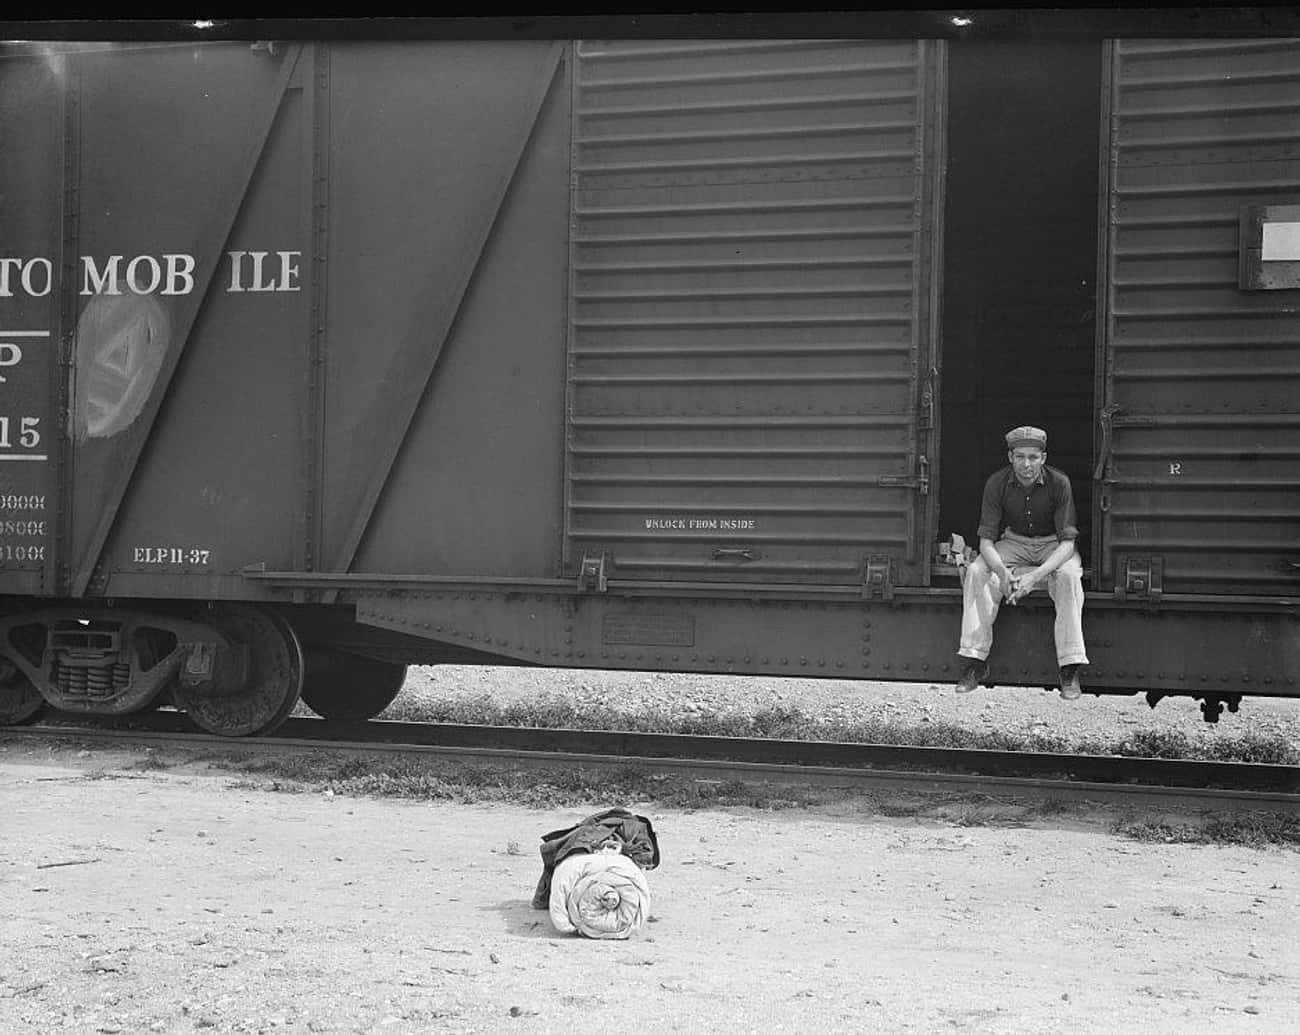 Itinerant Worker Waiting On A Stationary Train In Imperial Valley, CA, 1939